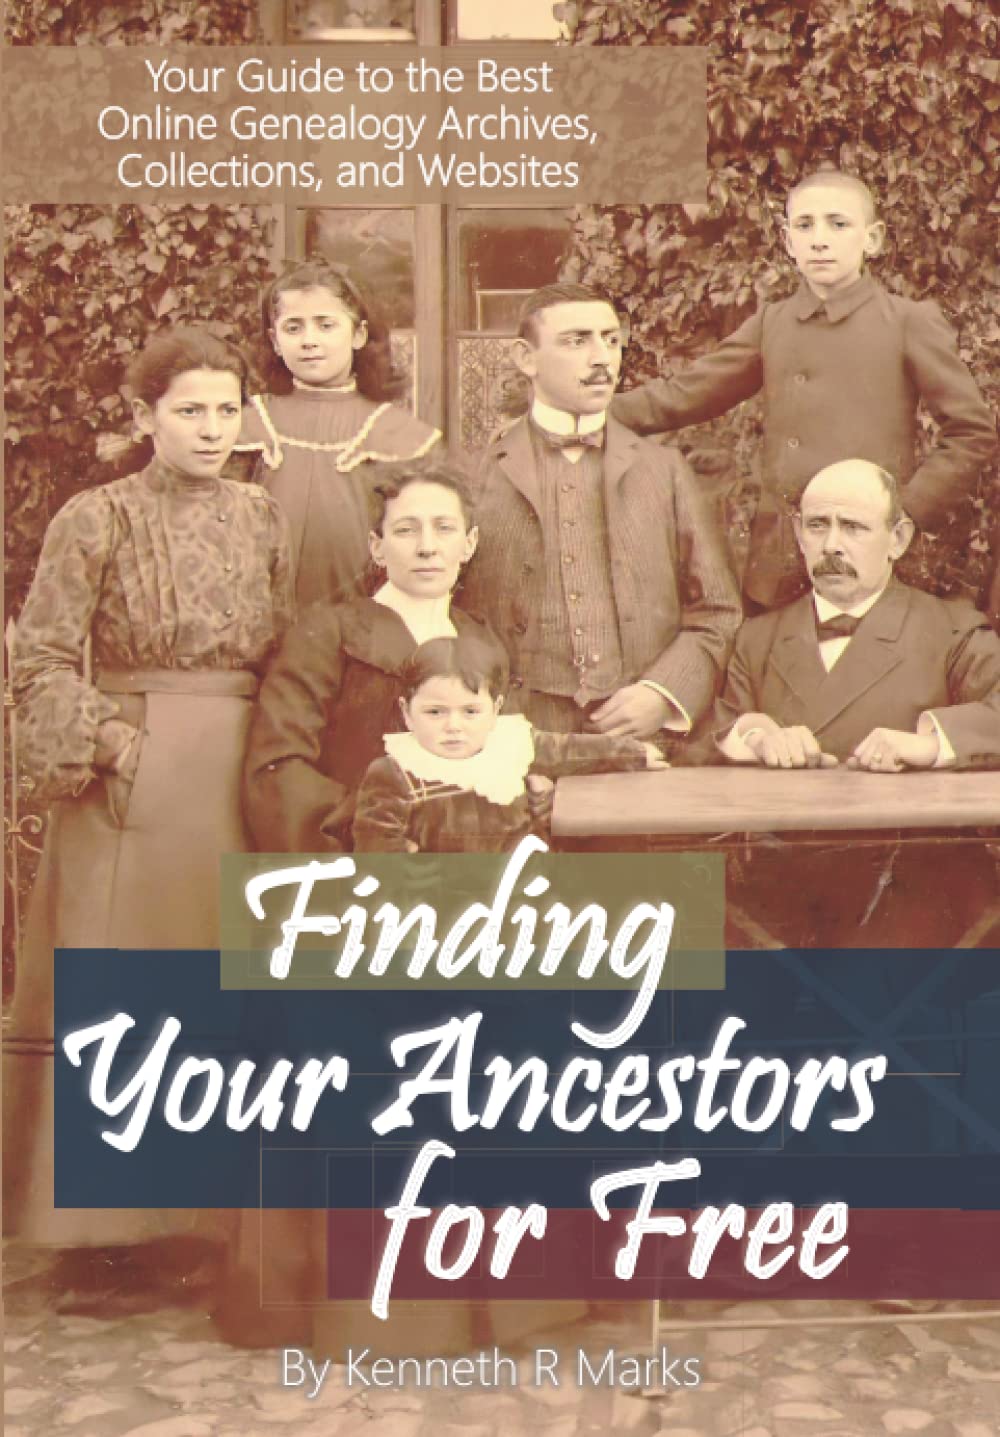 Finding Your Ancestors for Free: Your Guide to the Best Online Genealogy Archives, Collections, and Websites